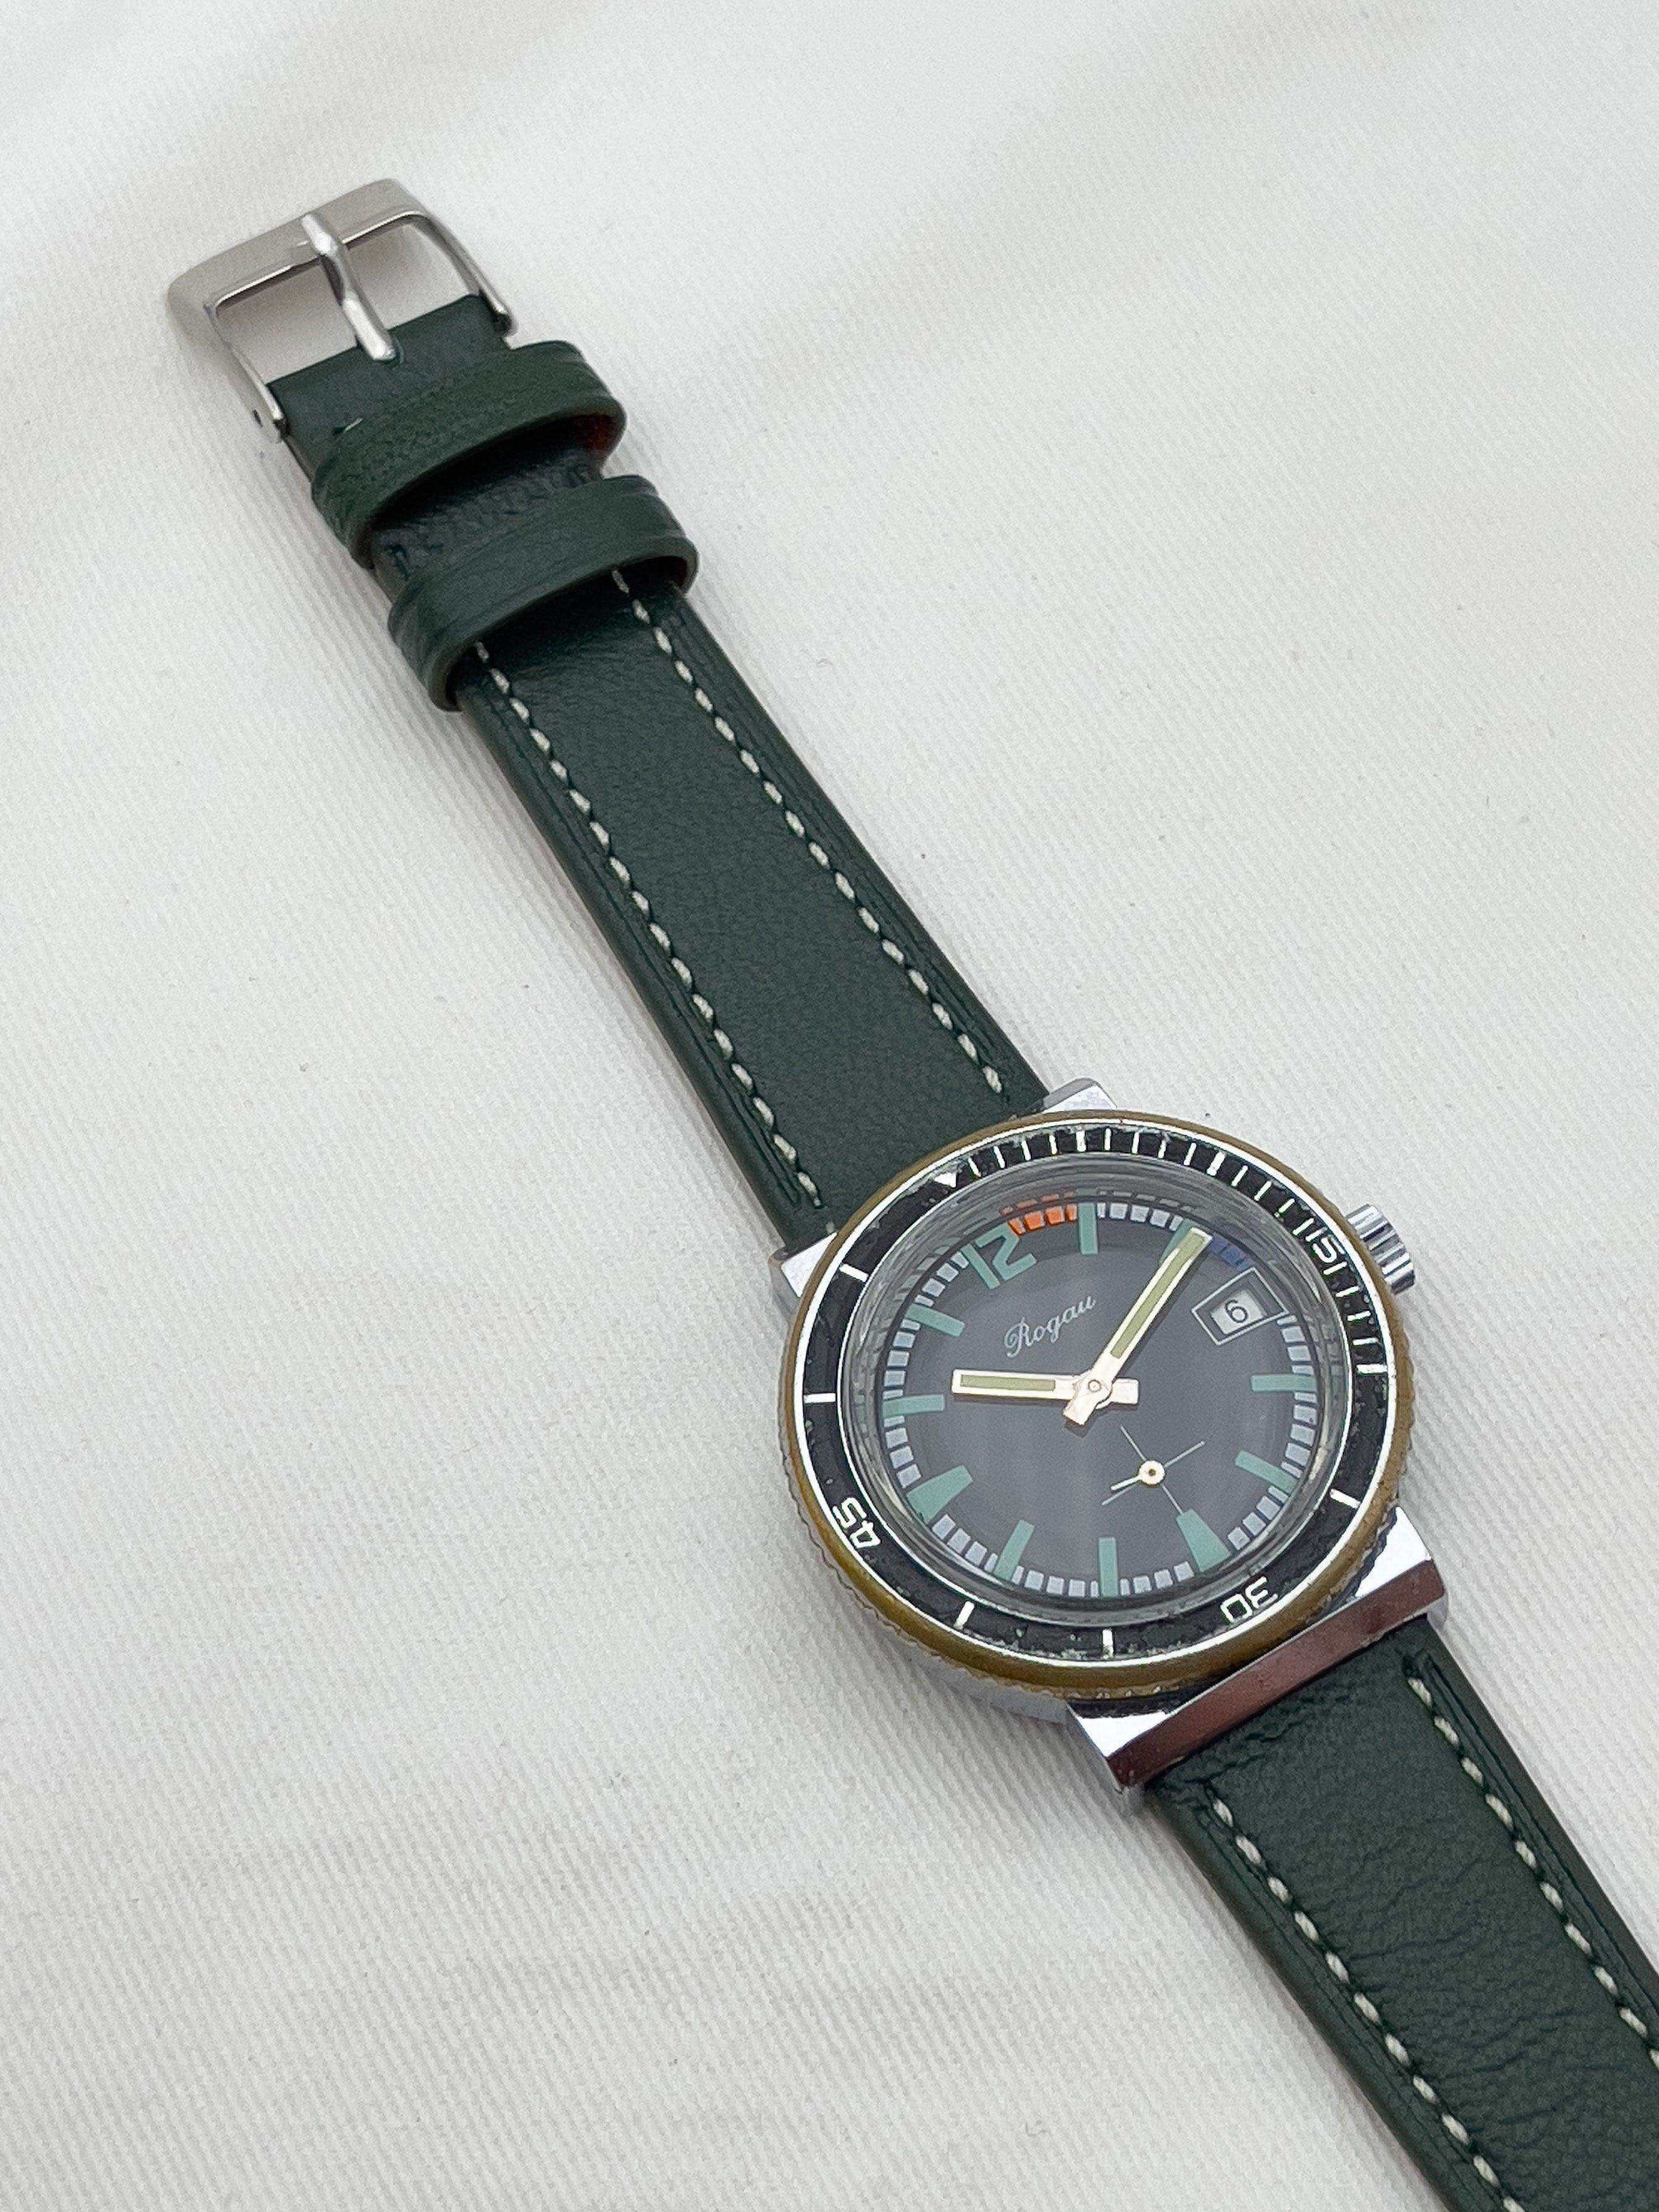 Rogau - Green Diver - 1960’s - Atelier Victor